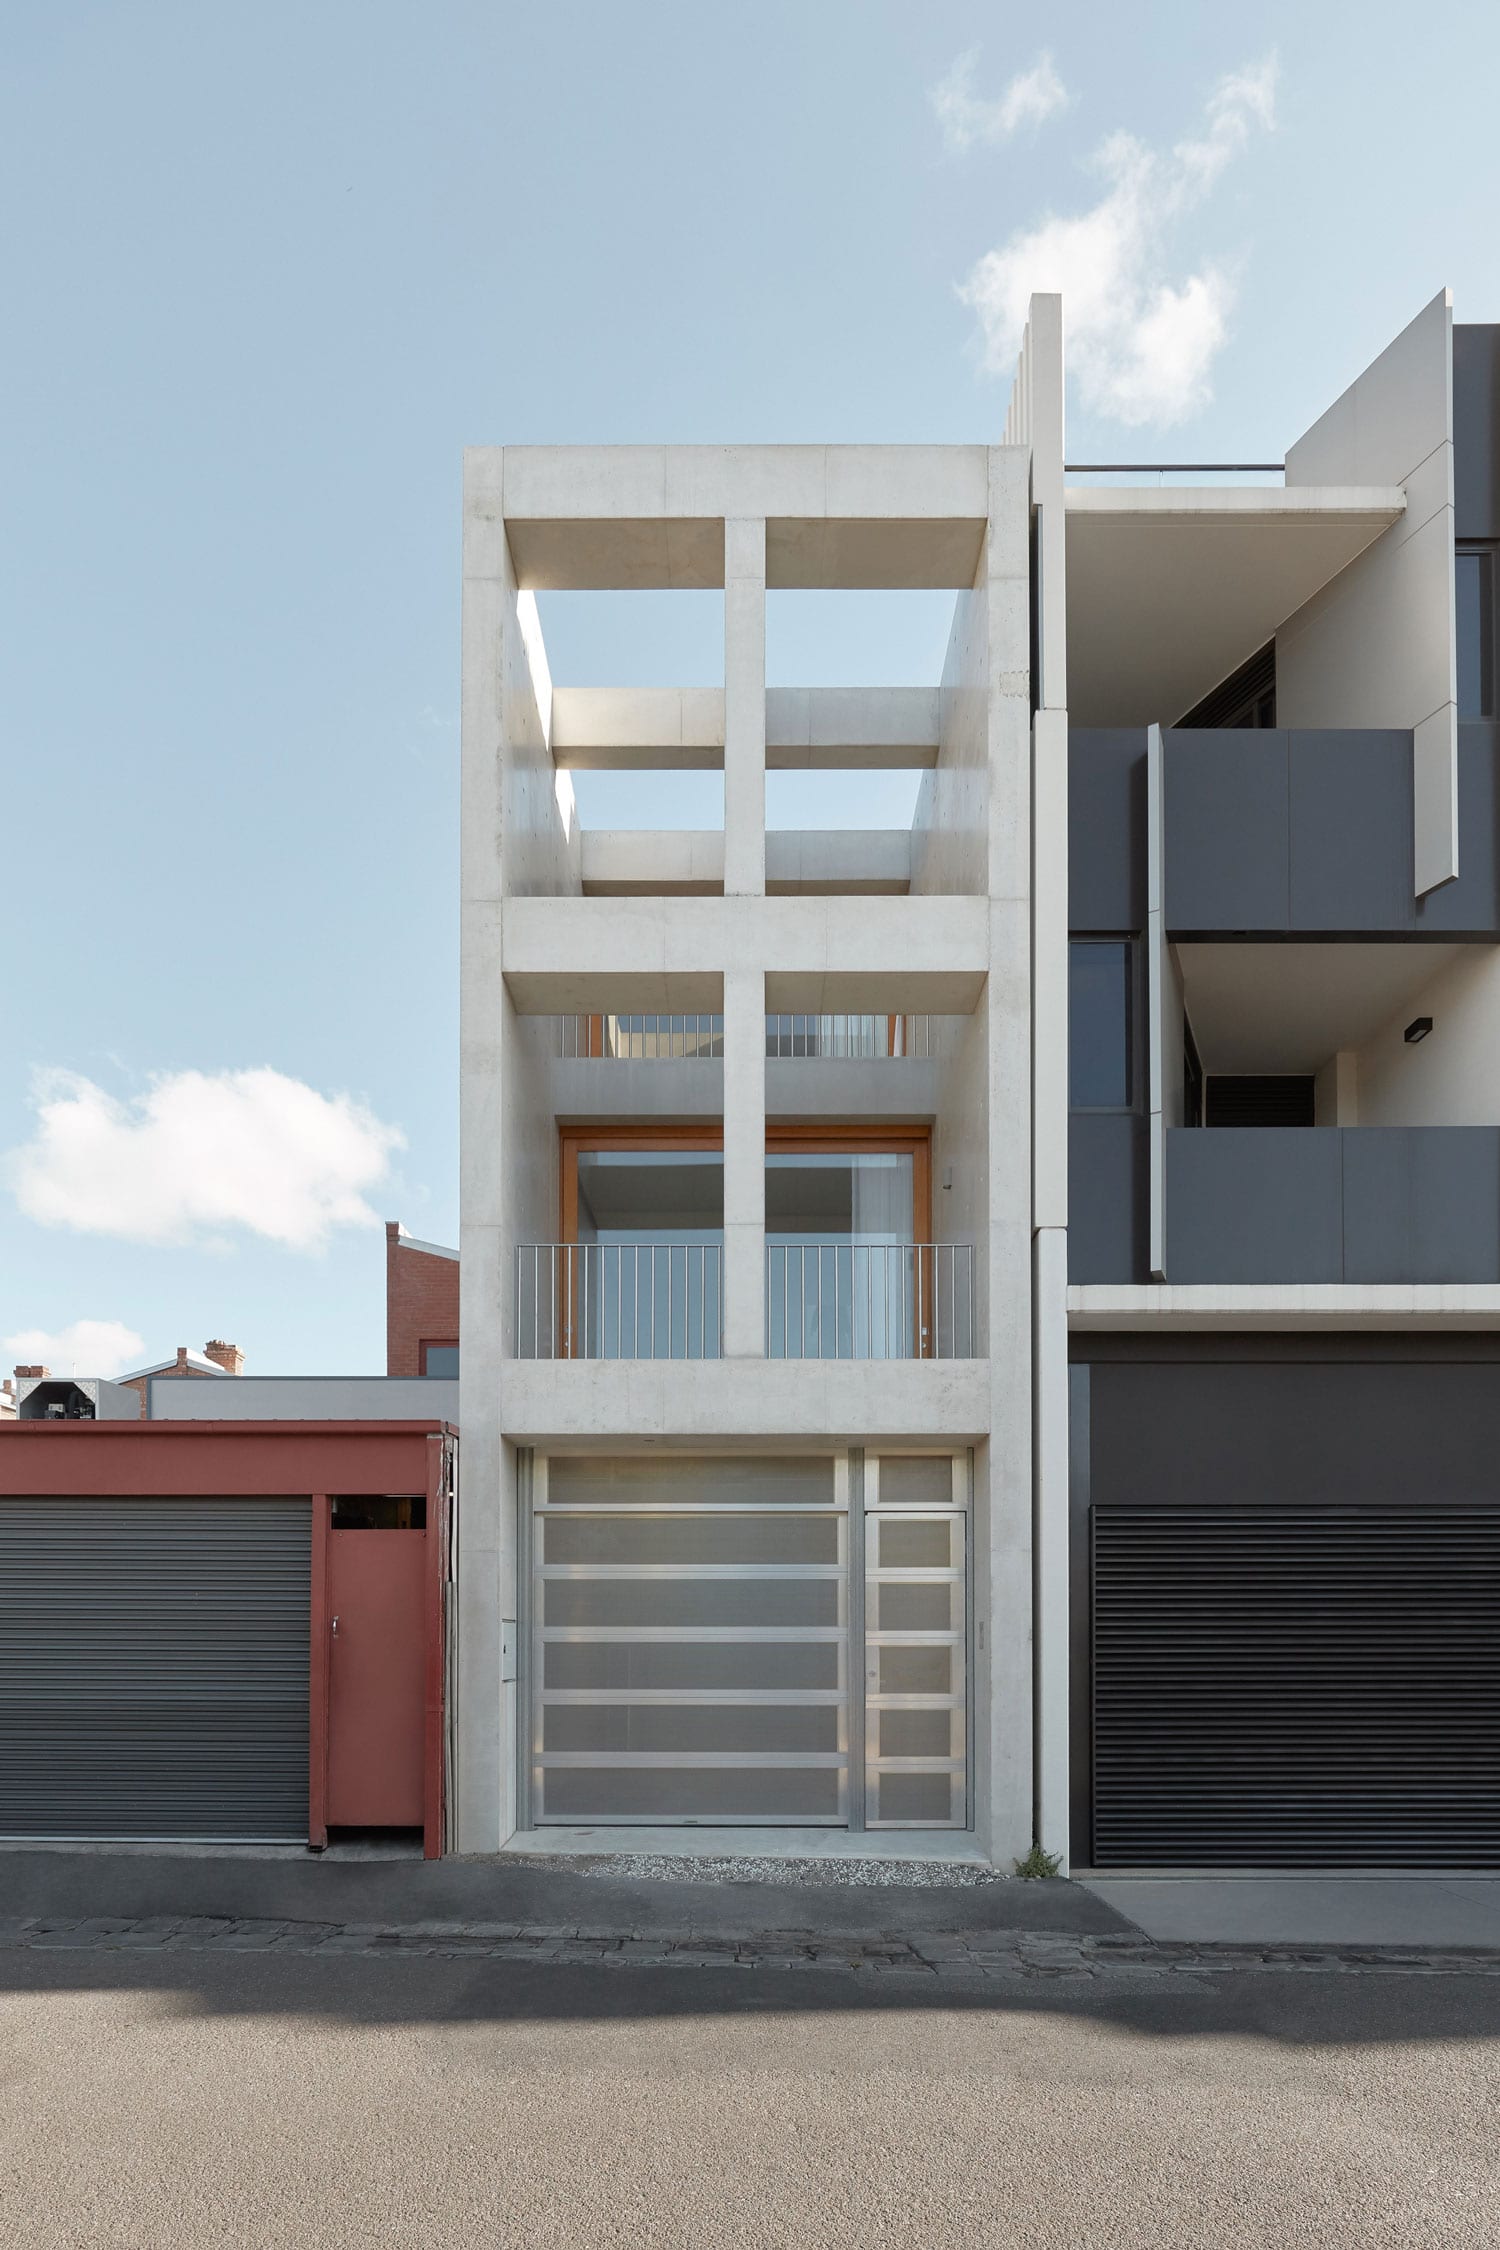 Skinny House is Melbourne by Oliver du Puy Architects